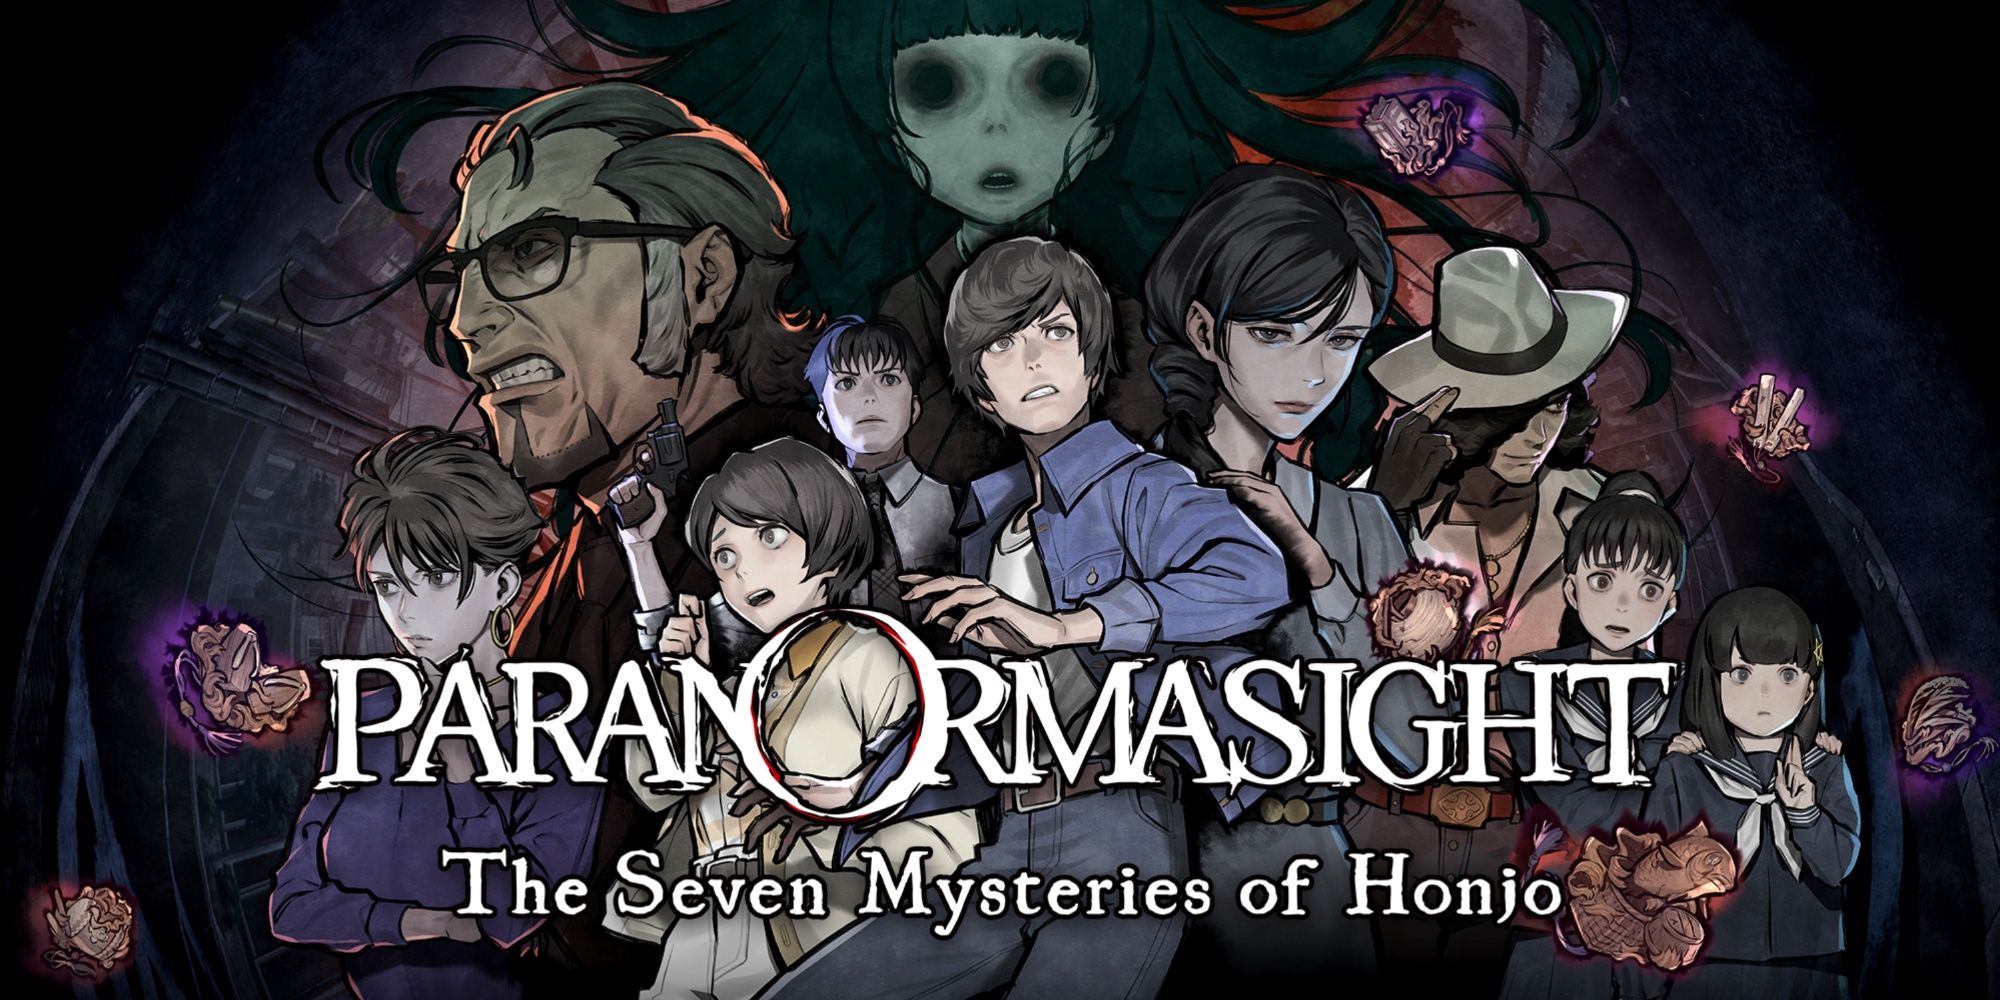 Paranormasight The Seven Mysteries Of Honjo official cover art